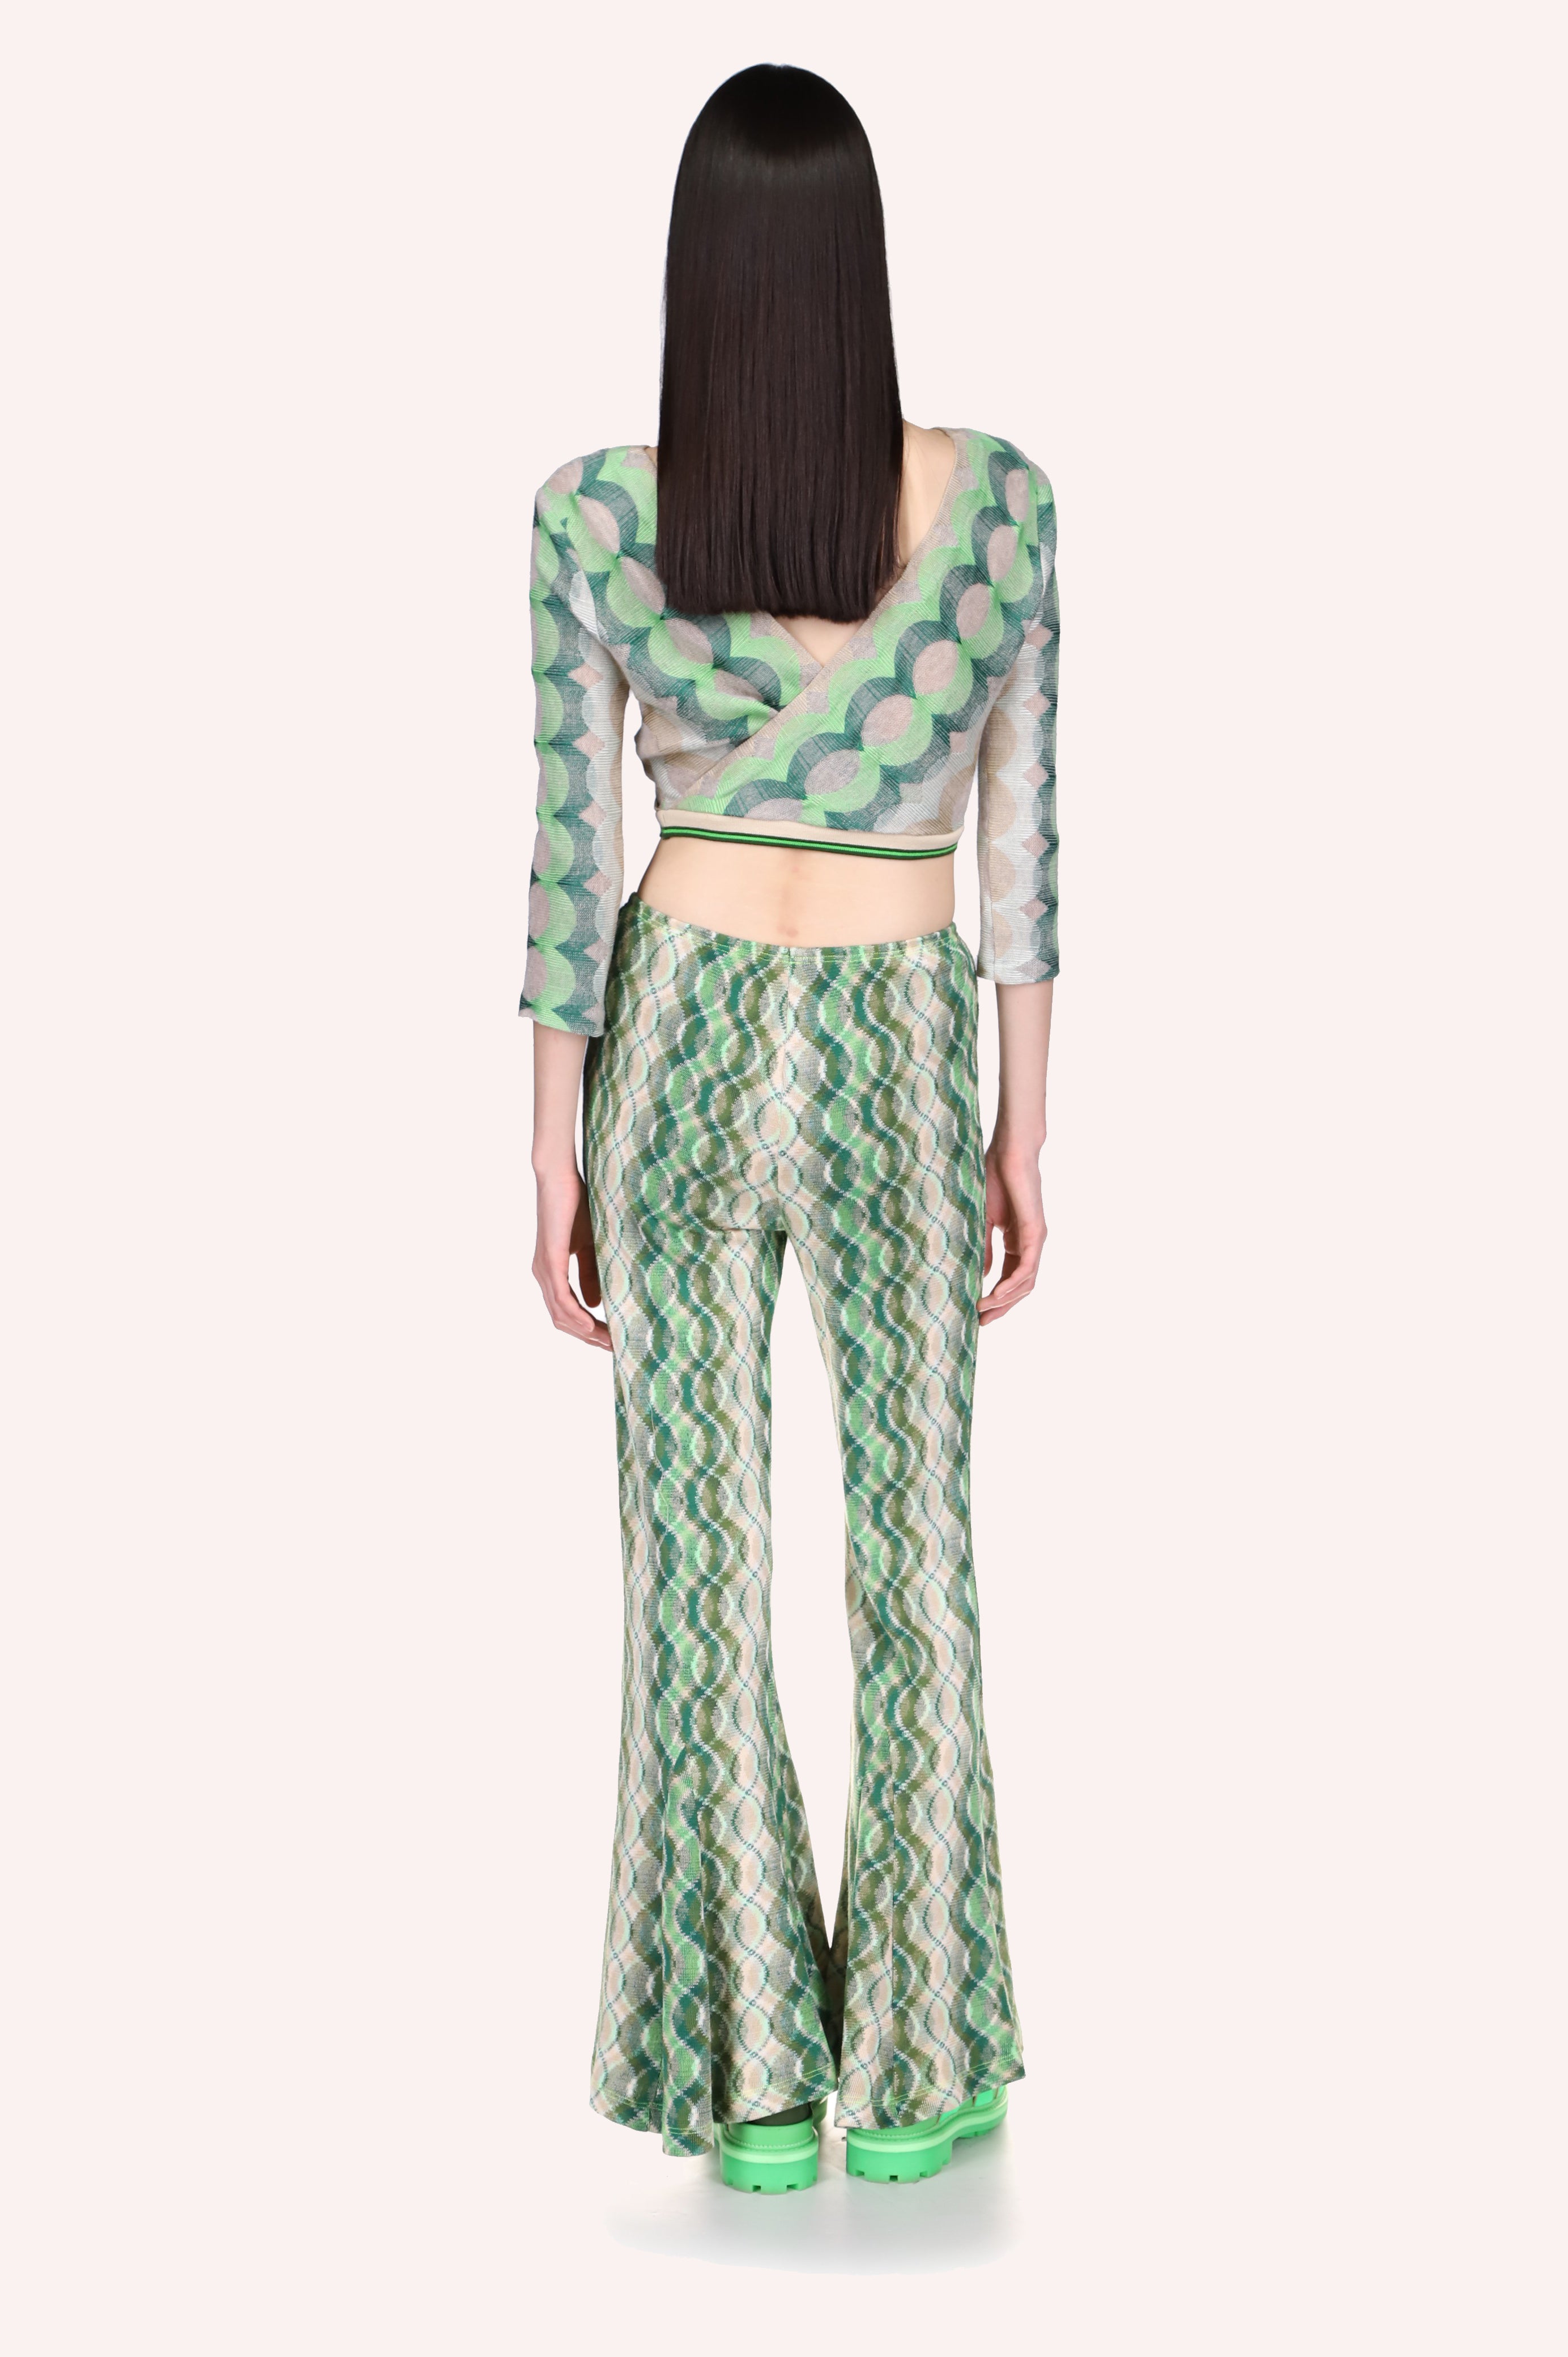 Wave Rider Knit Pant, long fitted pants on the hips, design of wavy lines in different shades of green